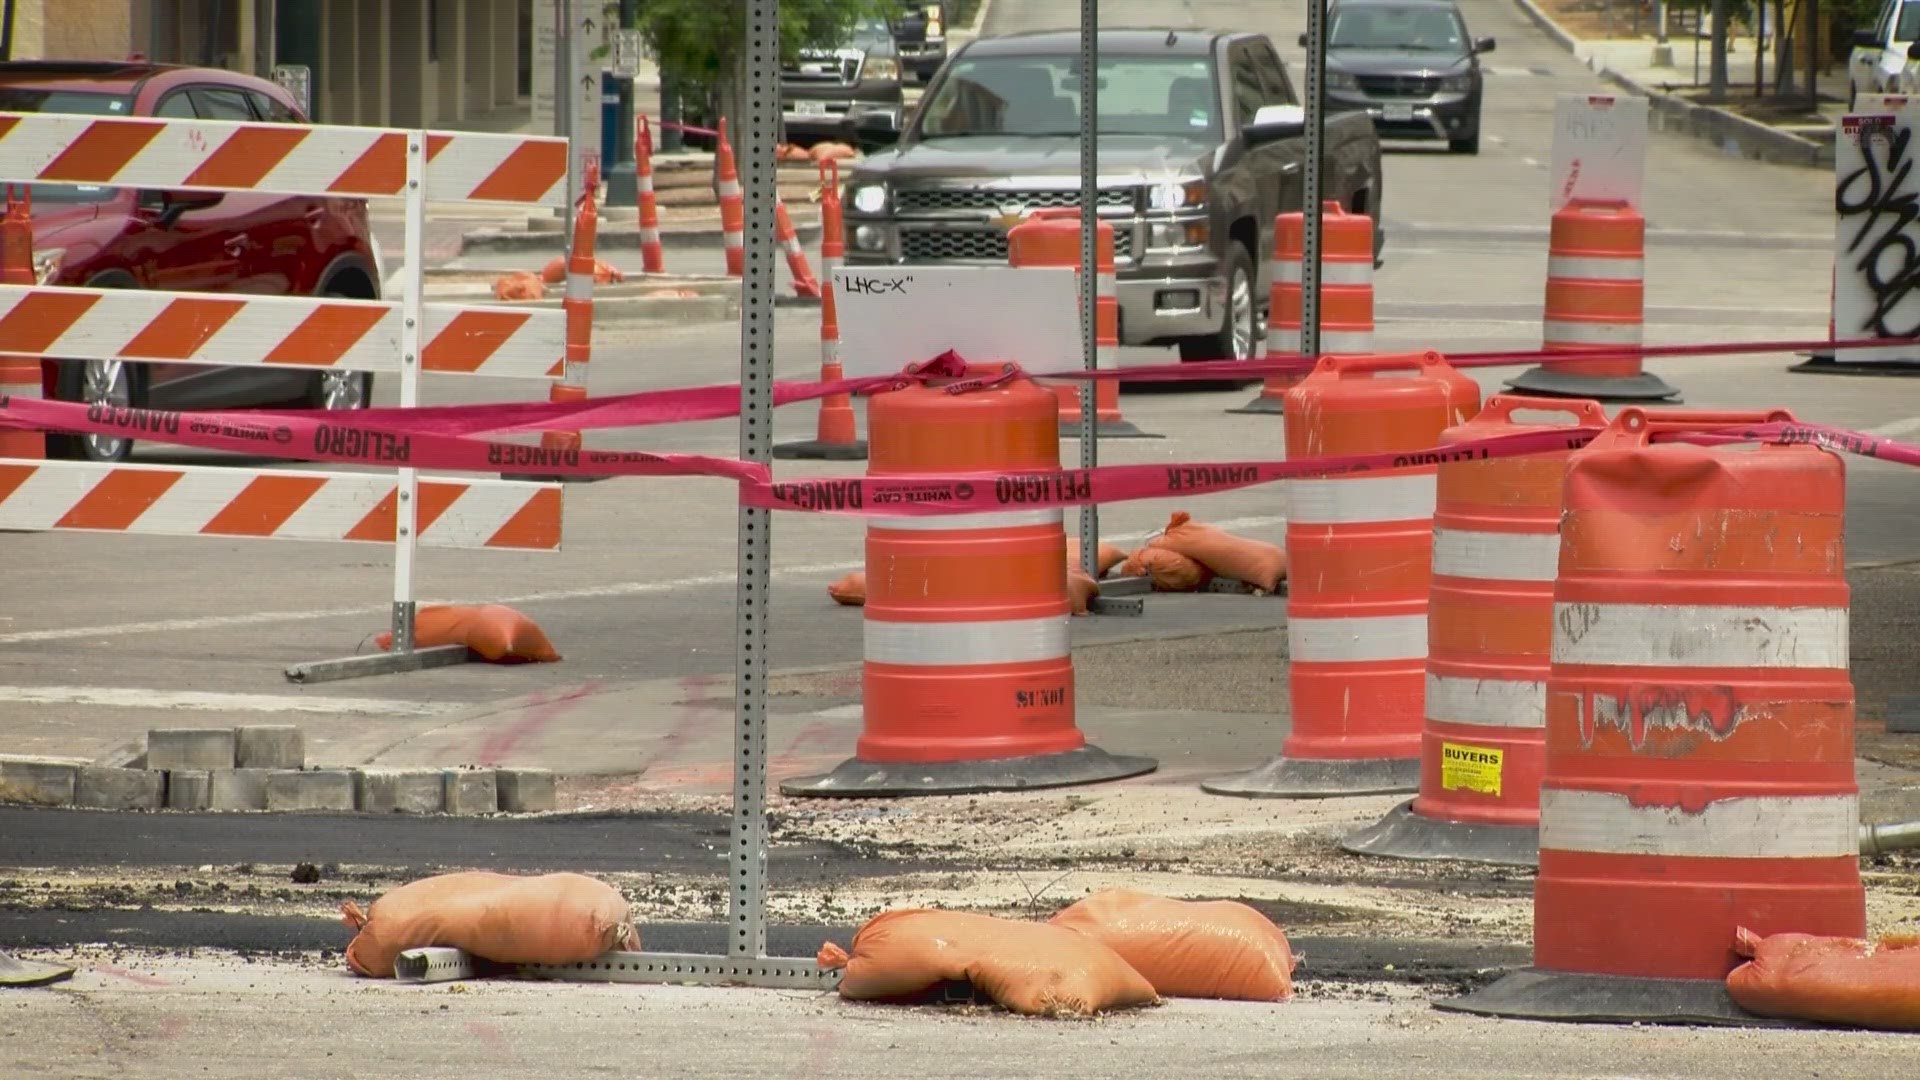 The city is urging fiesta-goers to plan ahead in anticipation of parking and construction as they make their way downtown for San Antonio's biggest party.